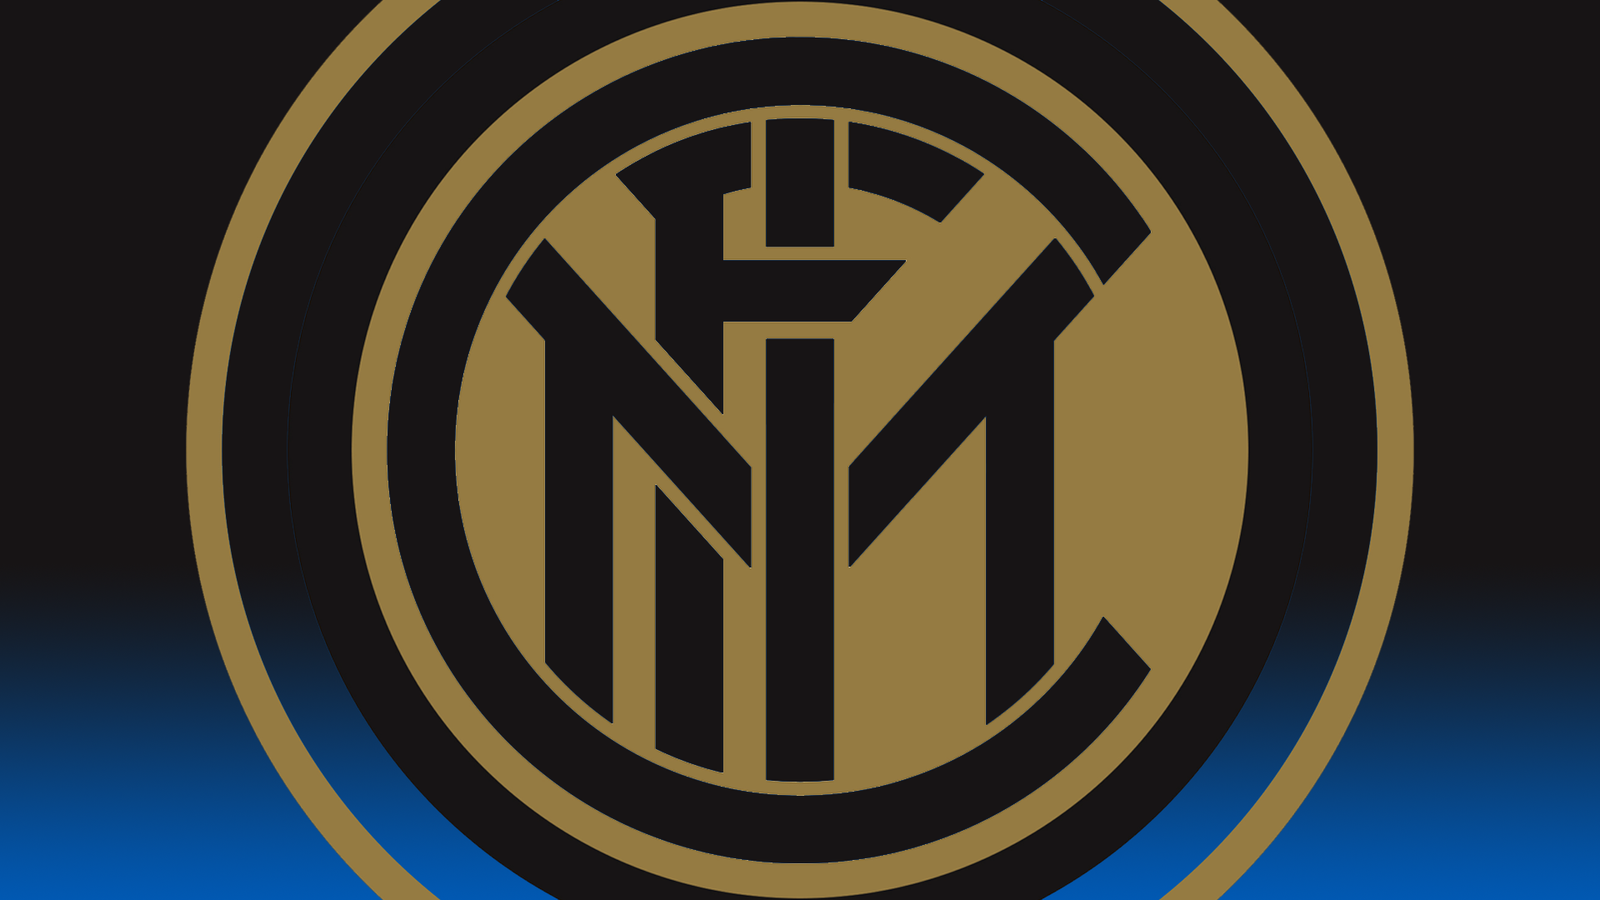 Find Out 12+ Facts Of Inter Milan Wallpaper Hd Your Friends Did not Let ...